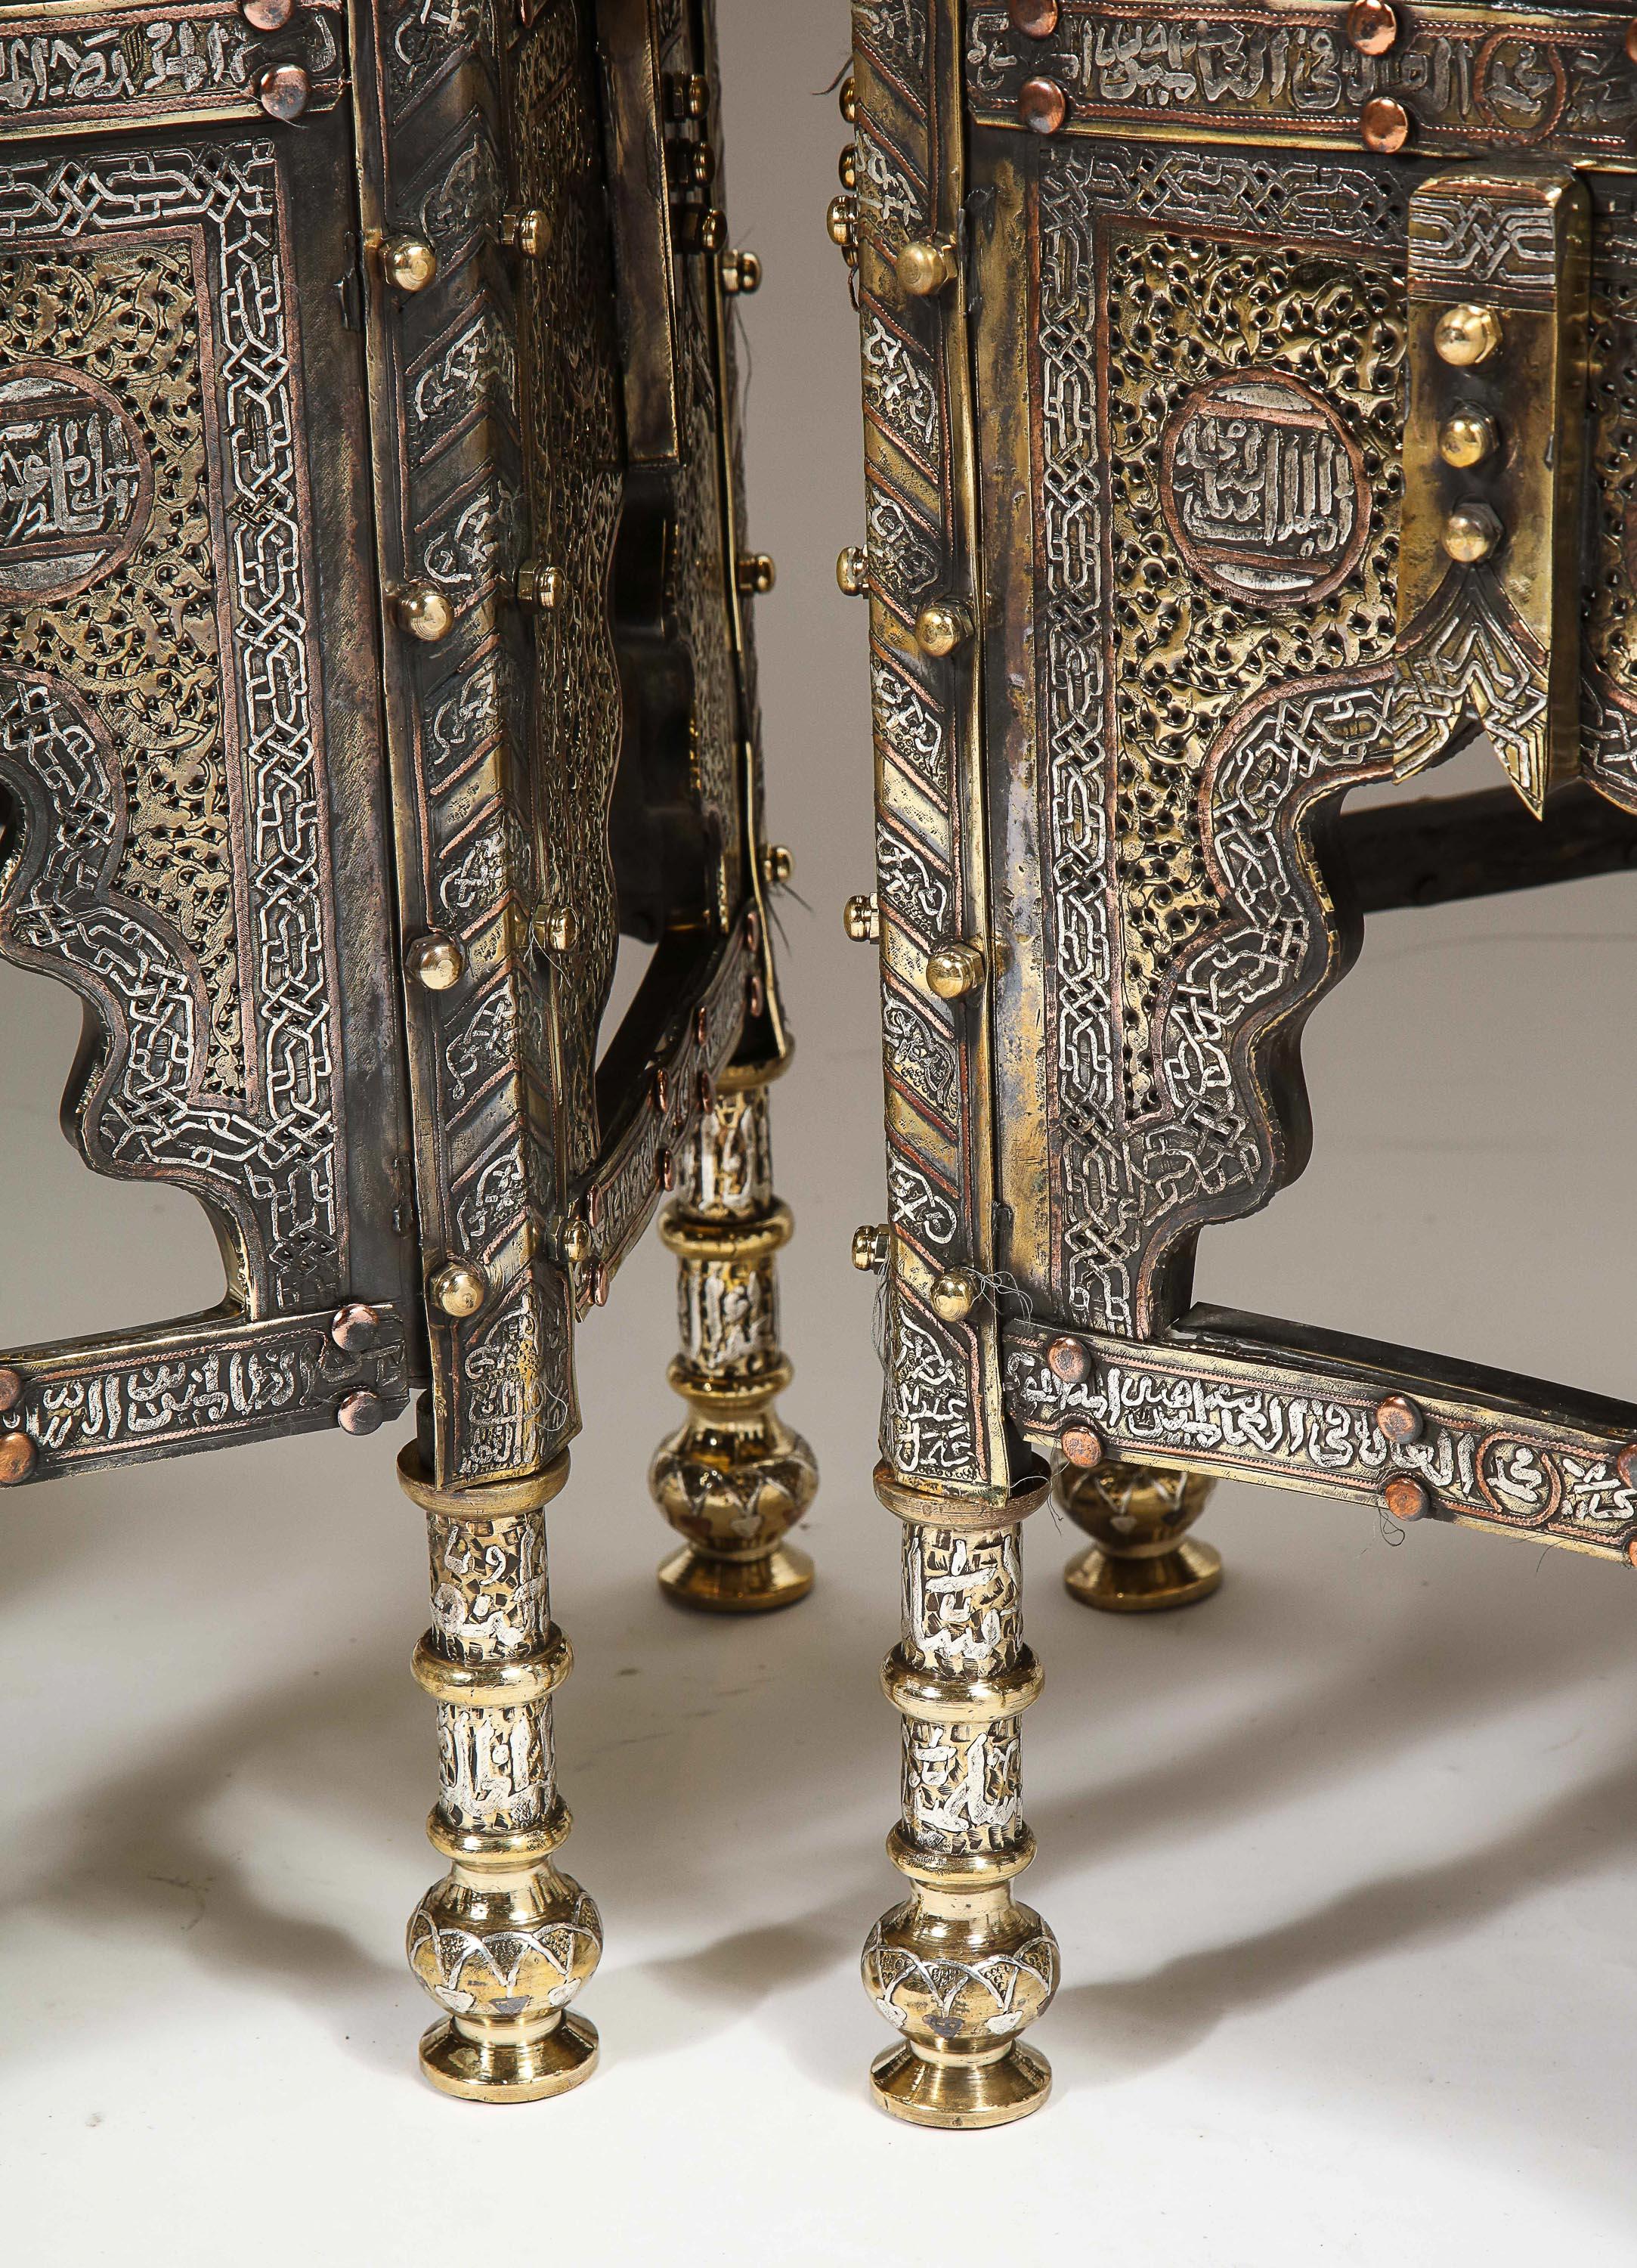 Exceptional Pair of Islamic Mamluk Revival Silver Inlaid Quran Side Tables For Sale 11